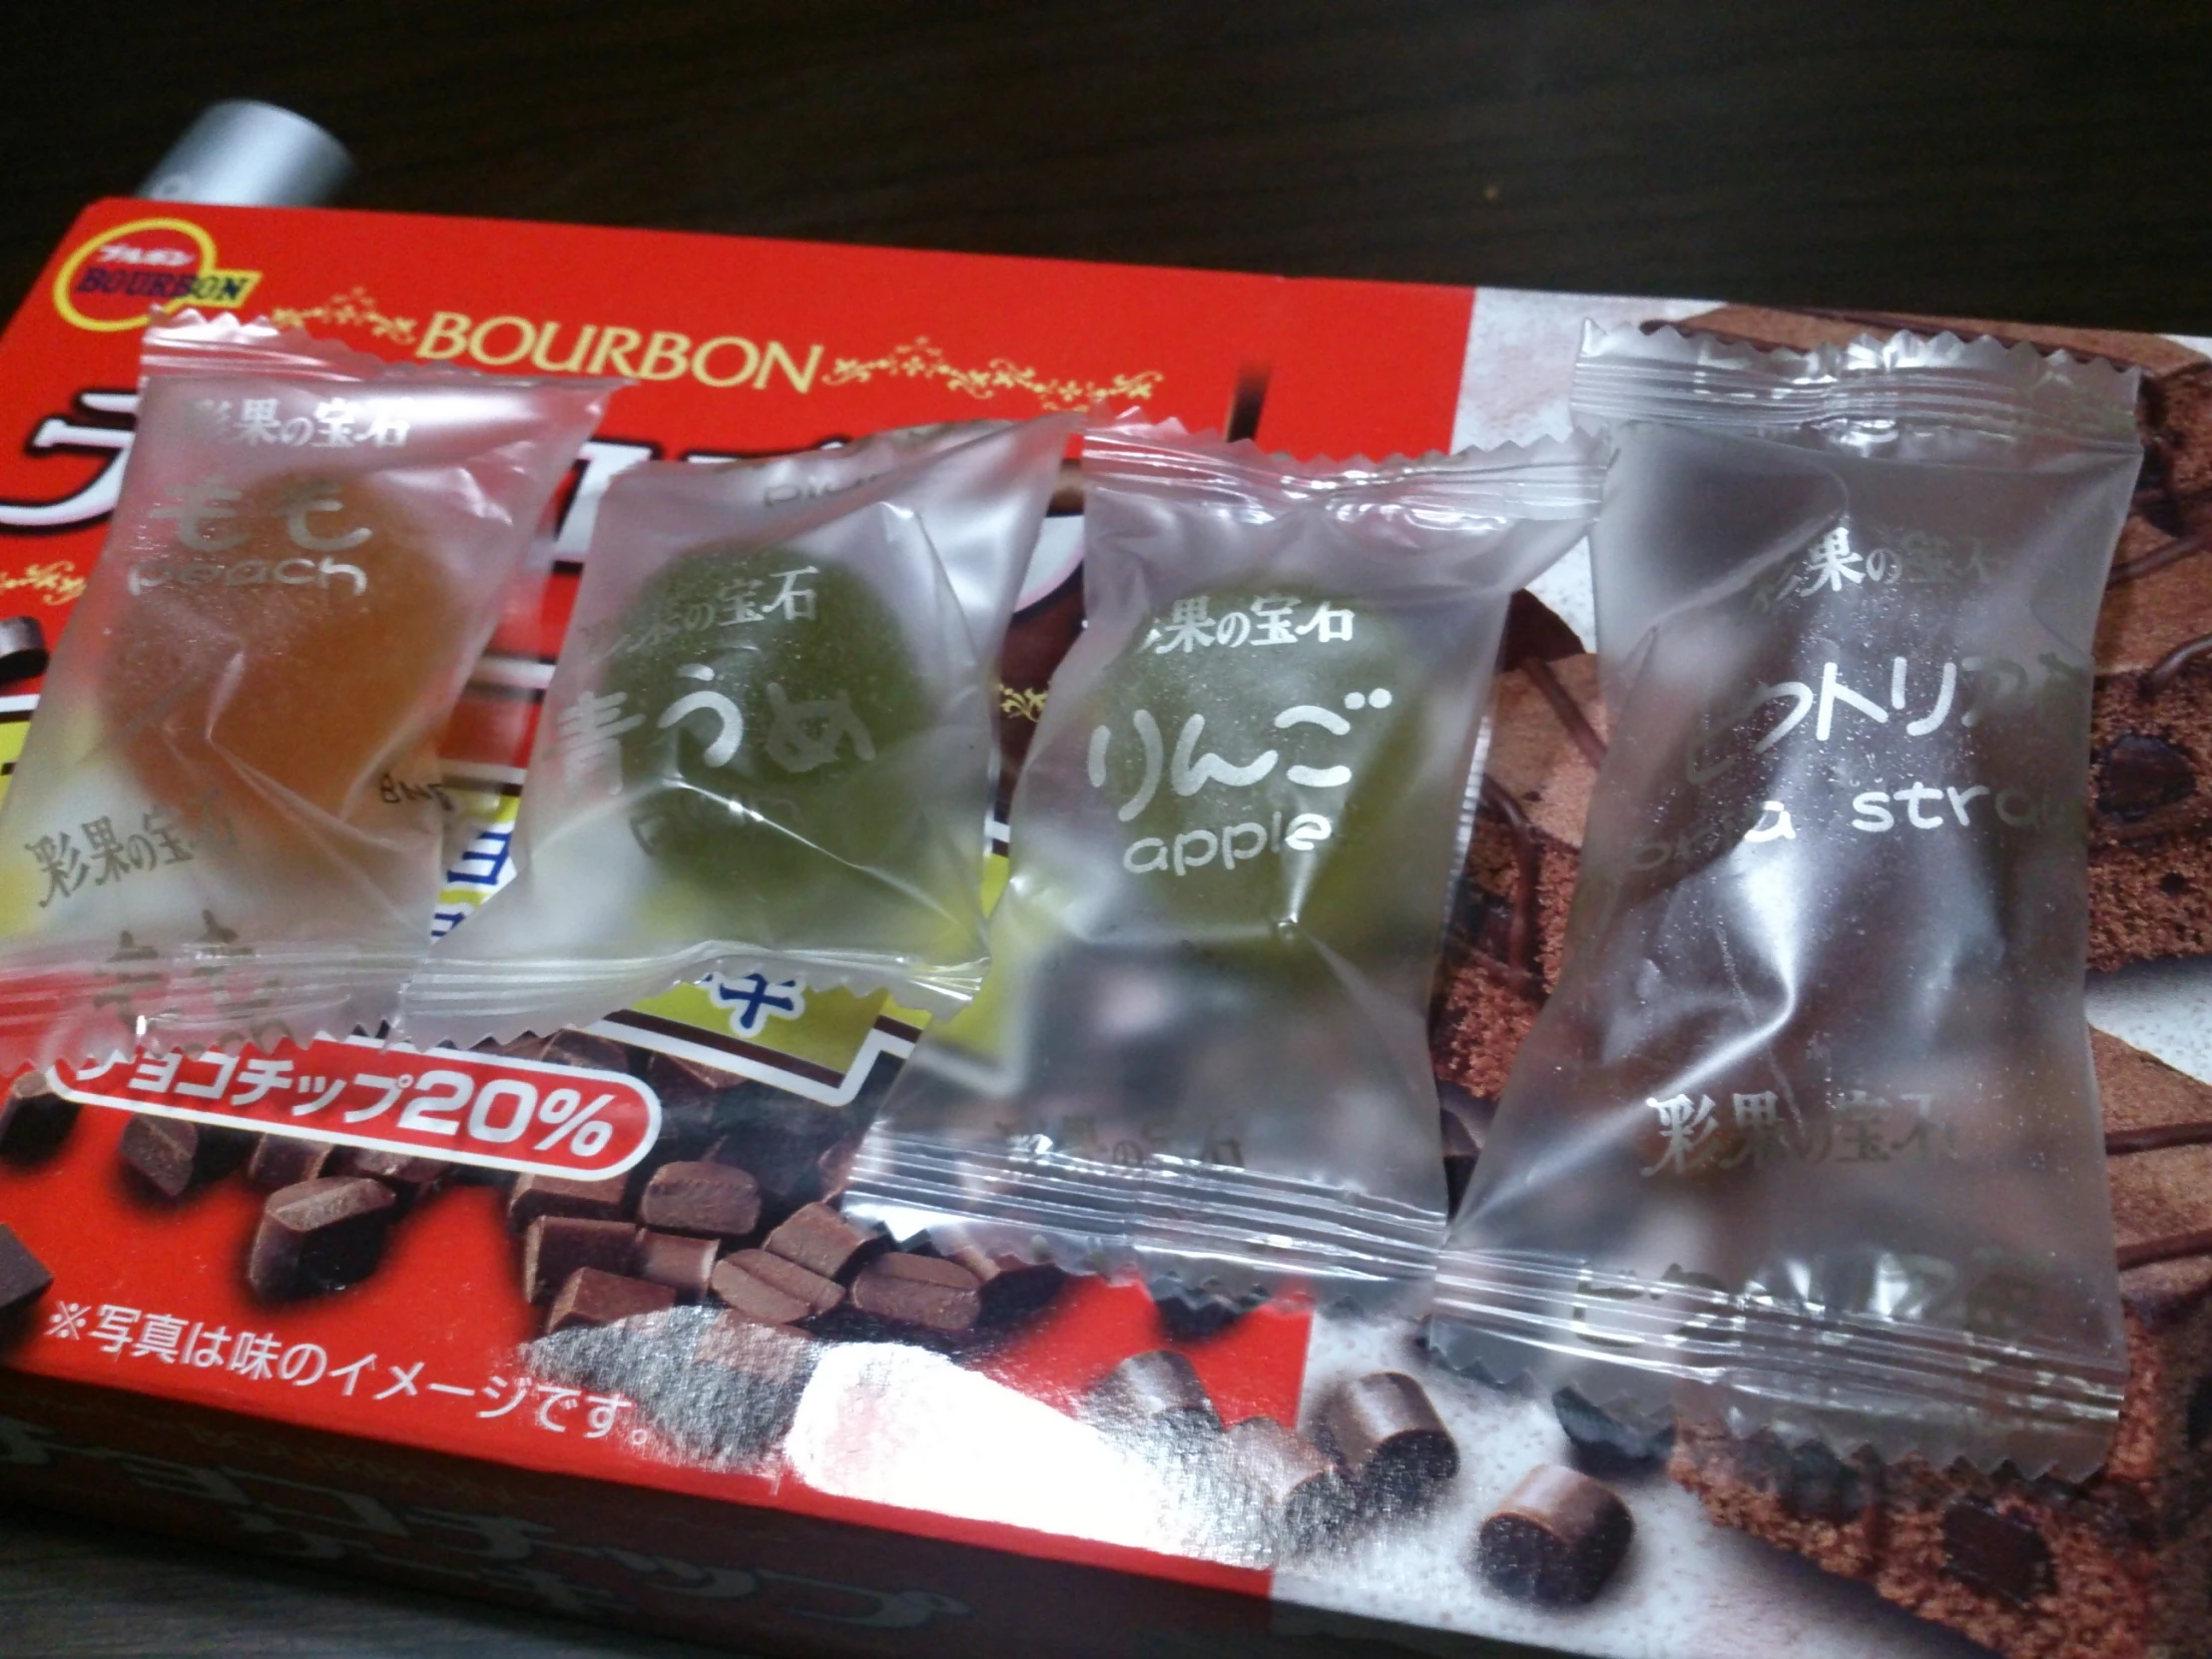 five different flavors of candies in a package